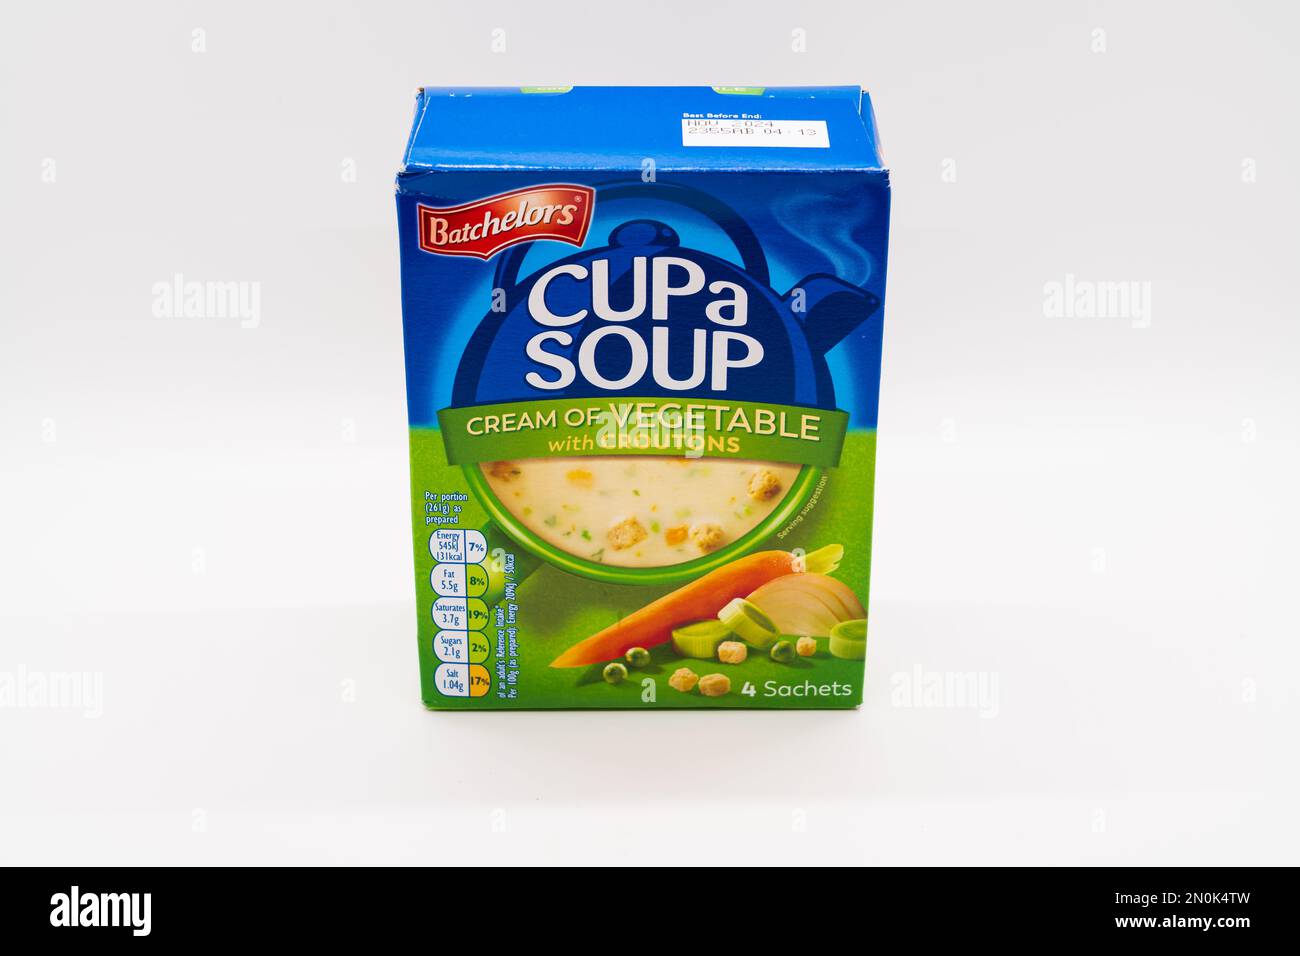 Wolverhampton, England - February 4 2023: A box of Batchelors Cup A Soup isolated on a white background Stock Photo